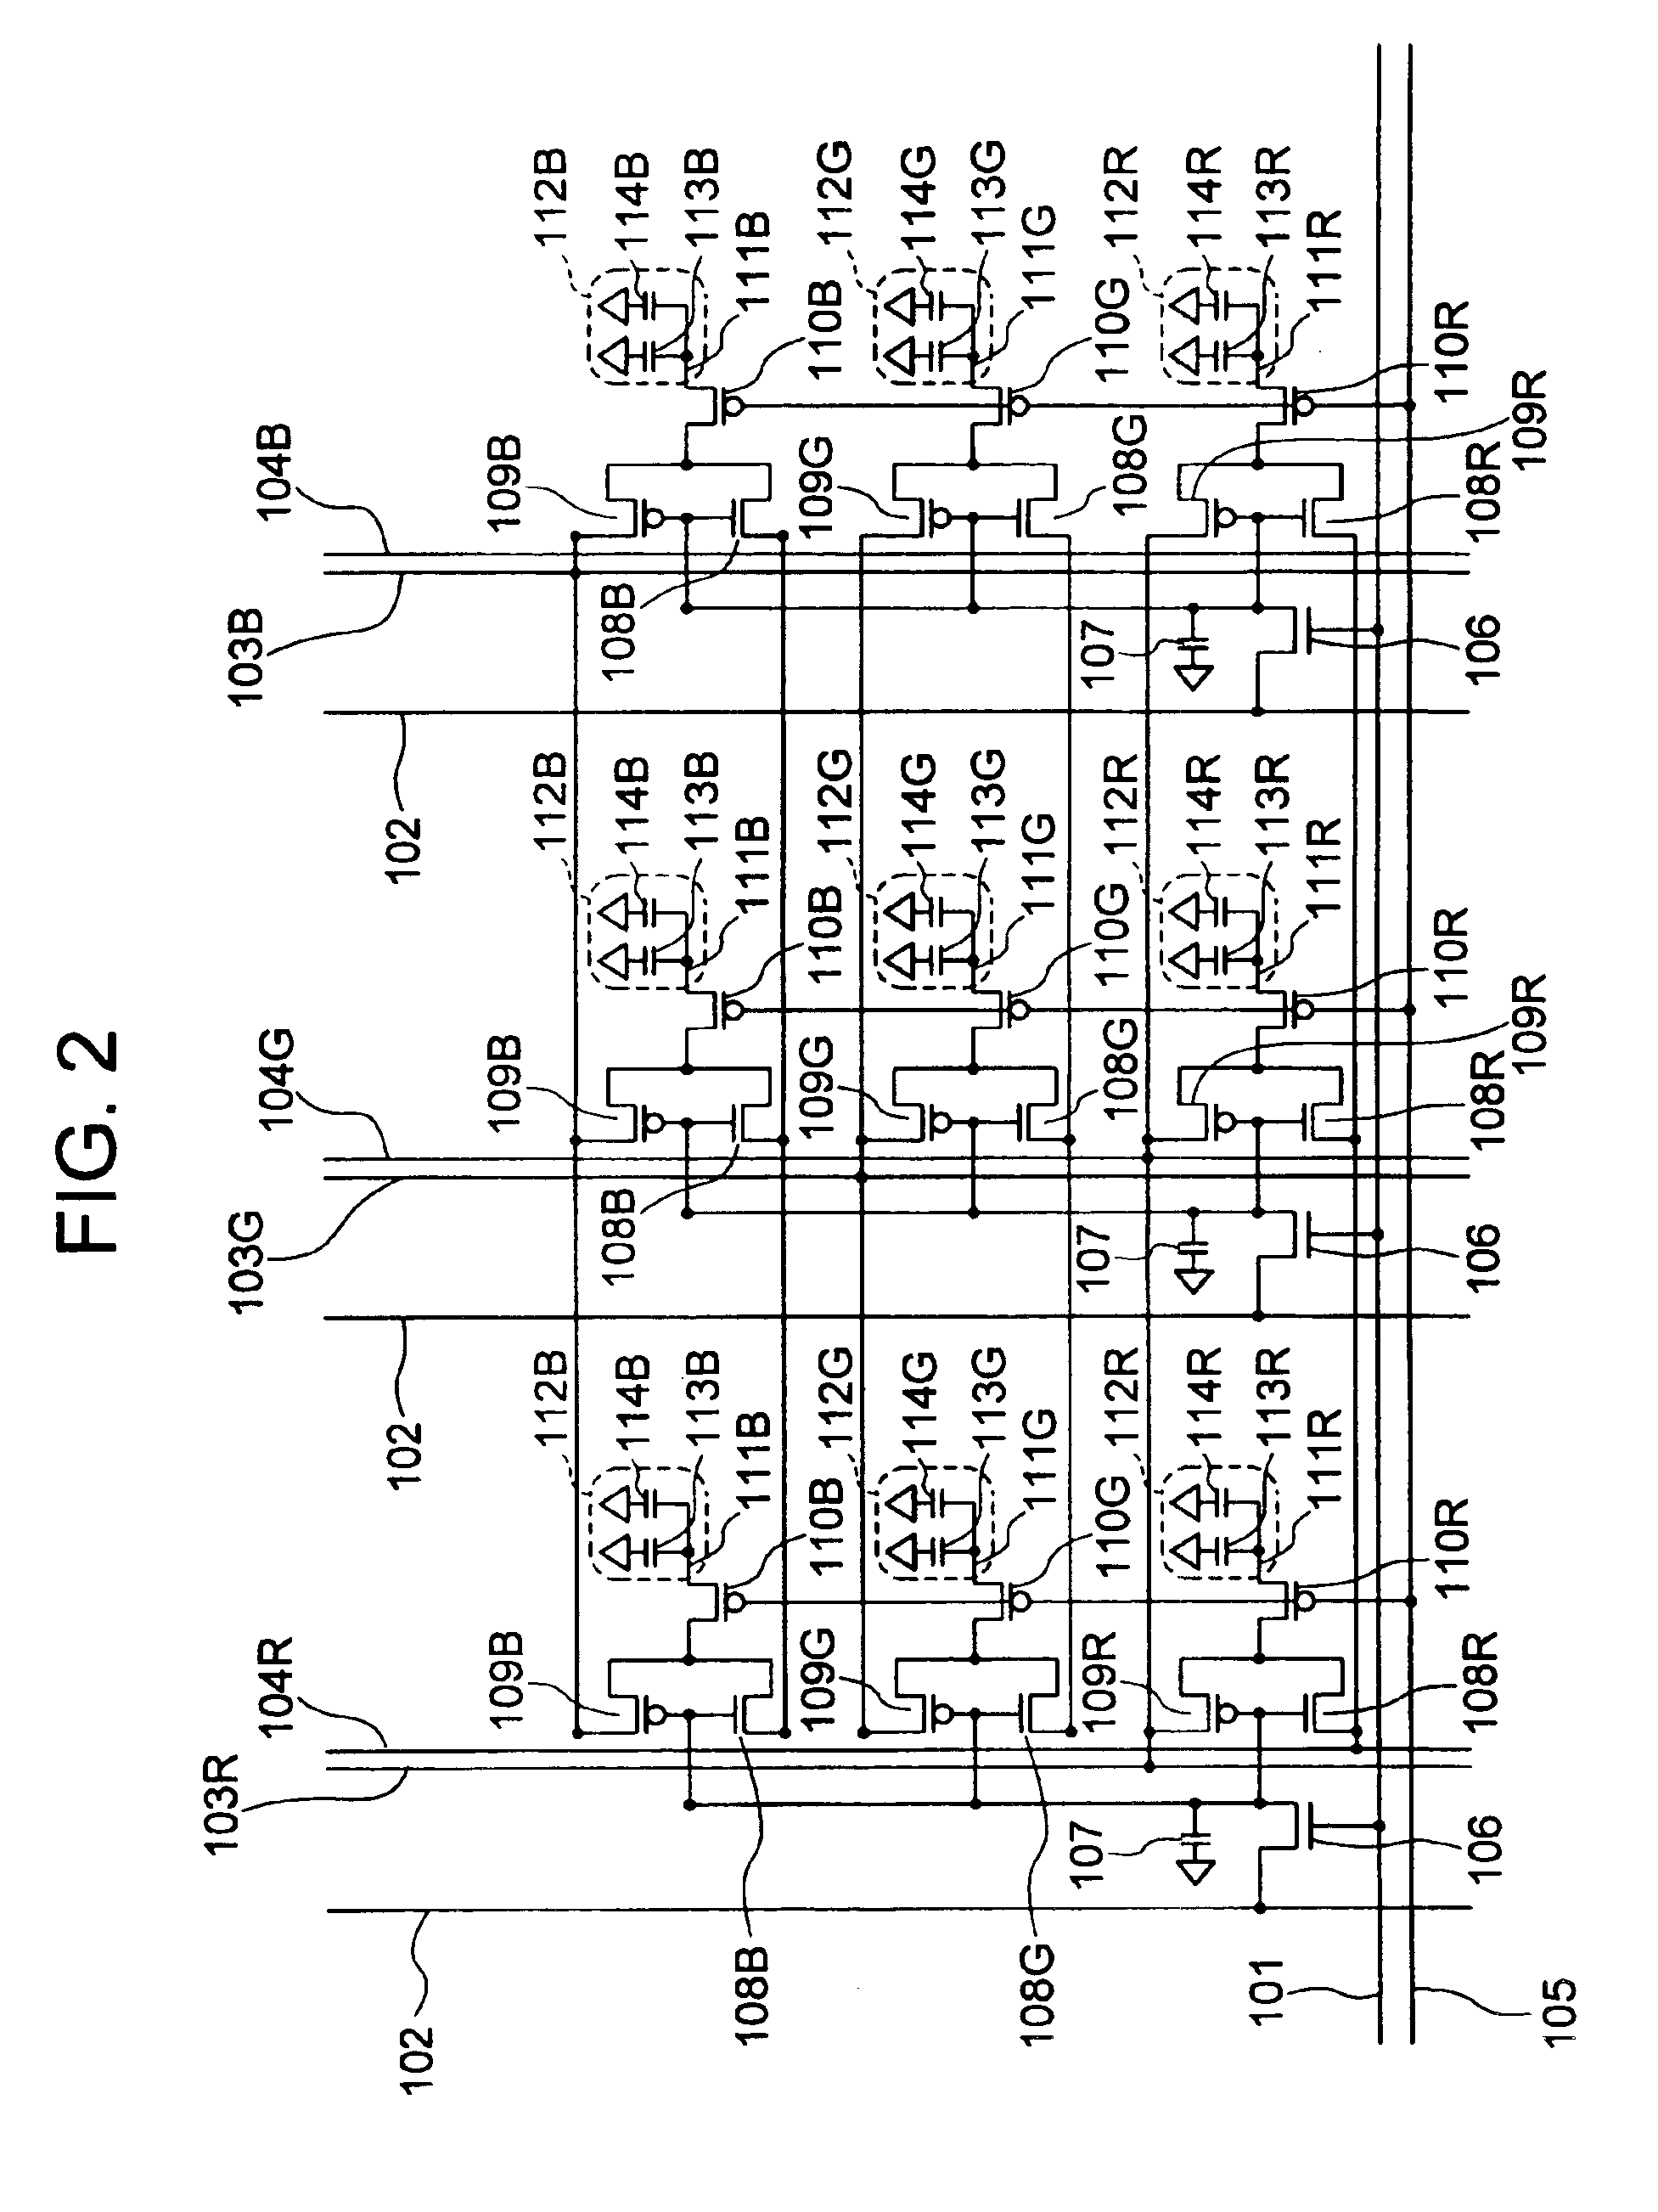 Display device for decompressing compressed image data received